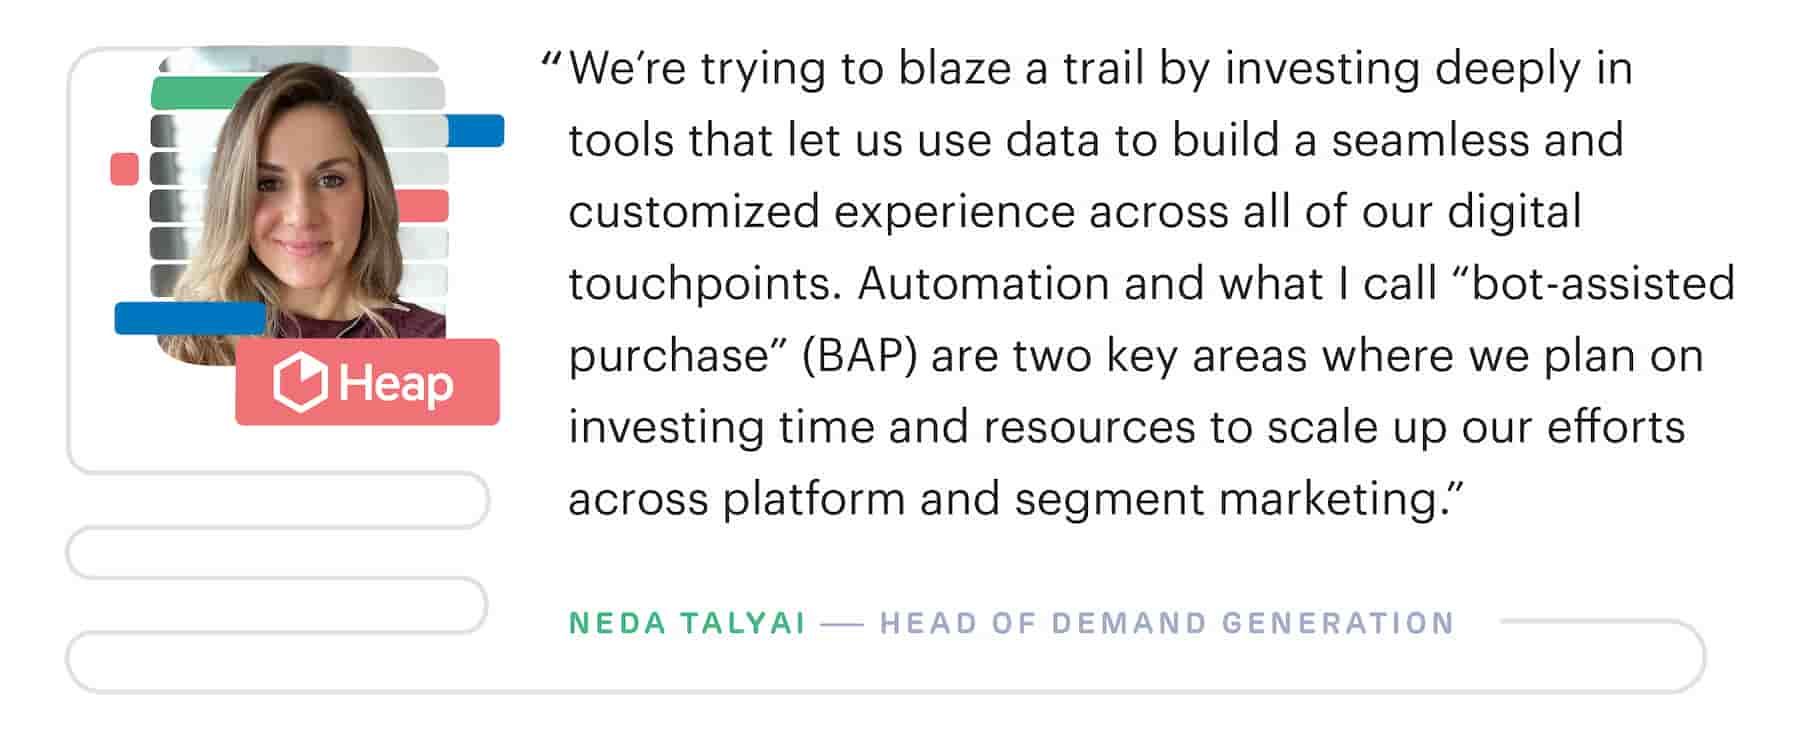 "We're trying to blaze a trail by investing deeply in martech tools that let us use data to build a seamless and customized experience across all of our digital touchpoints." – Neda Talyai, Head of Demand Generation at Heap